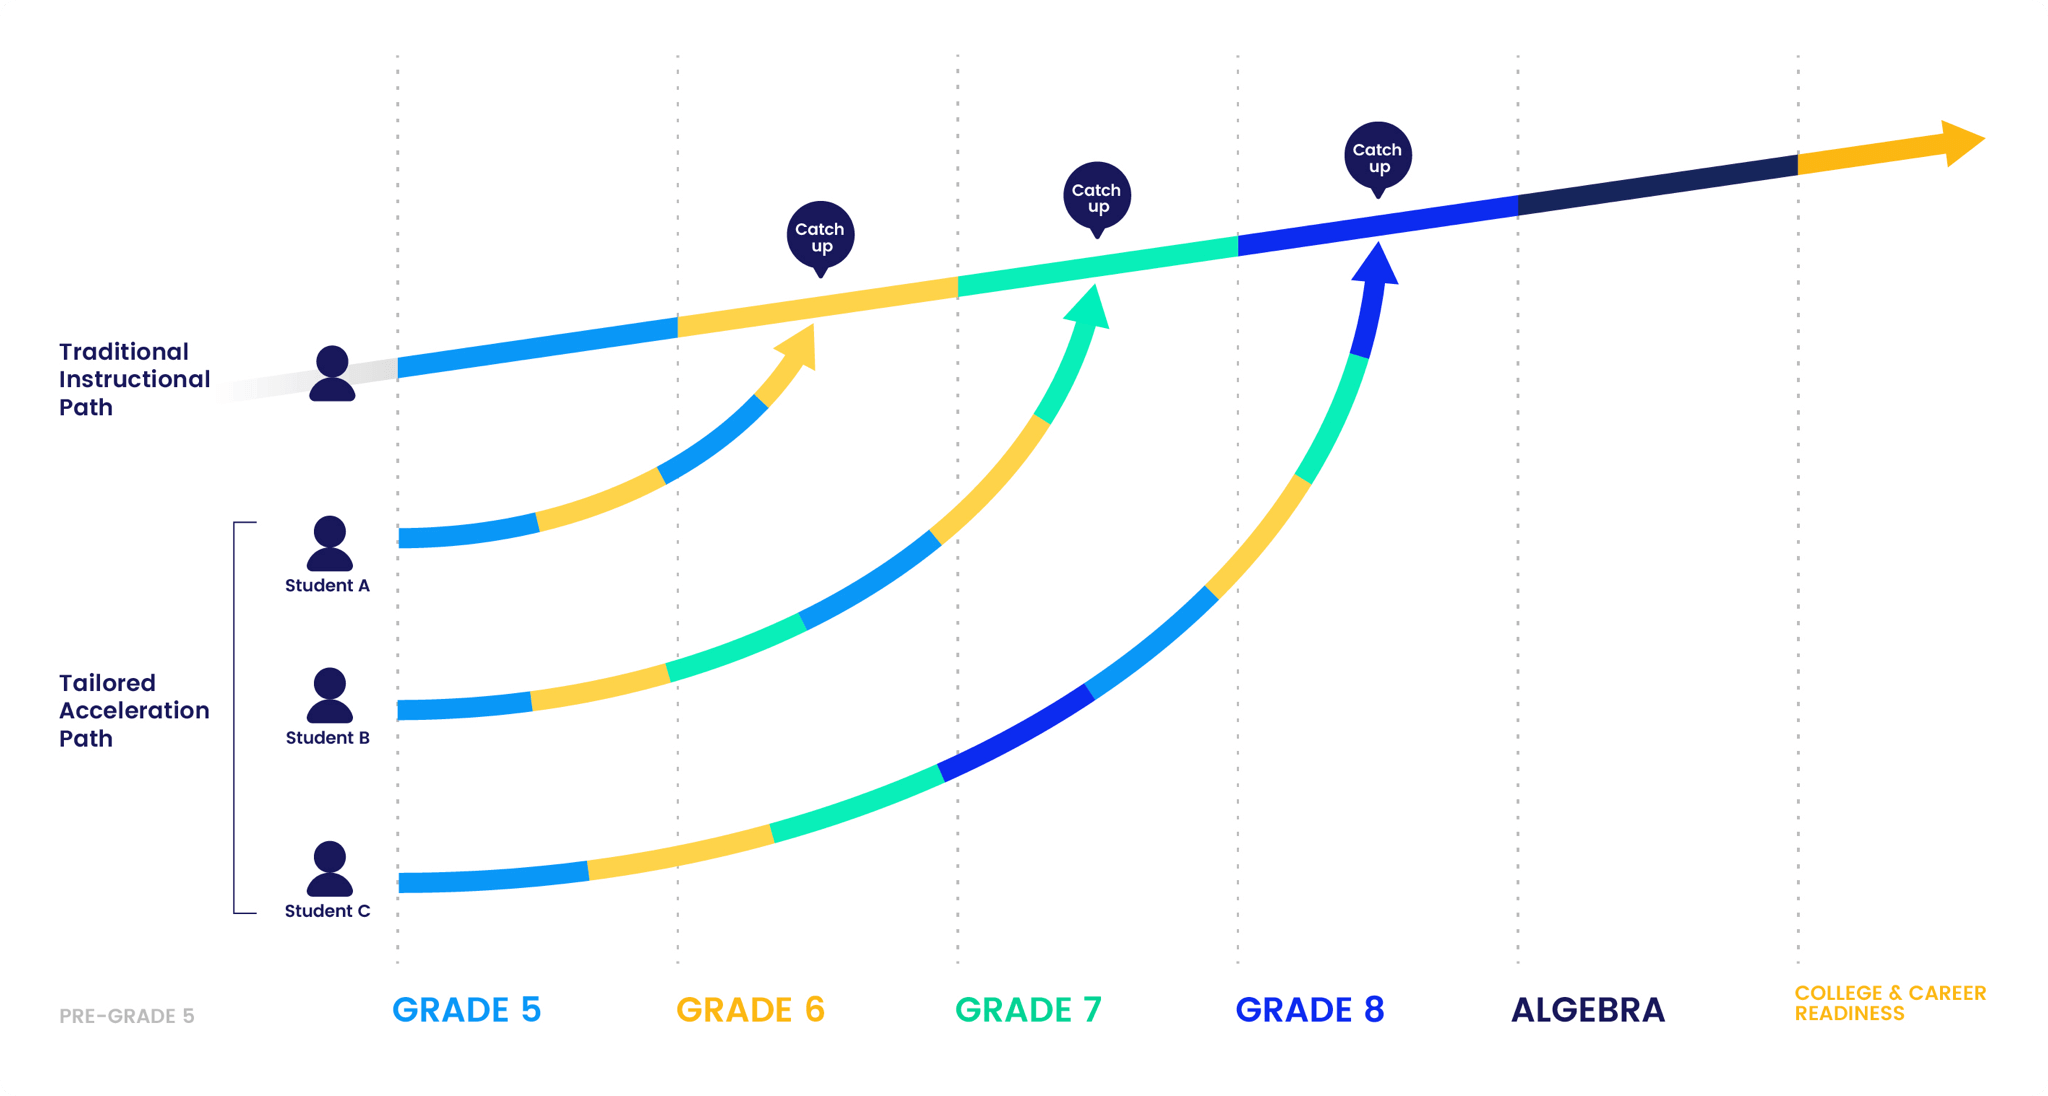 With a tailored acceleration path, students will have a better chance at getting back on track to algebra readiness